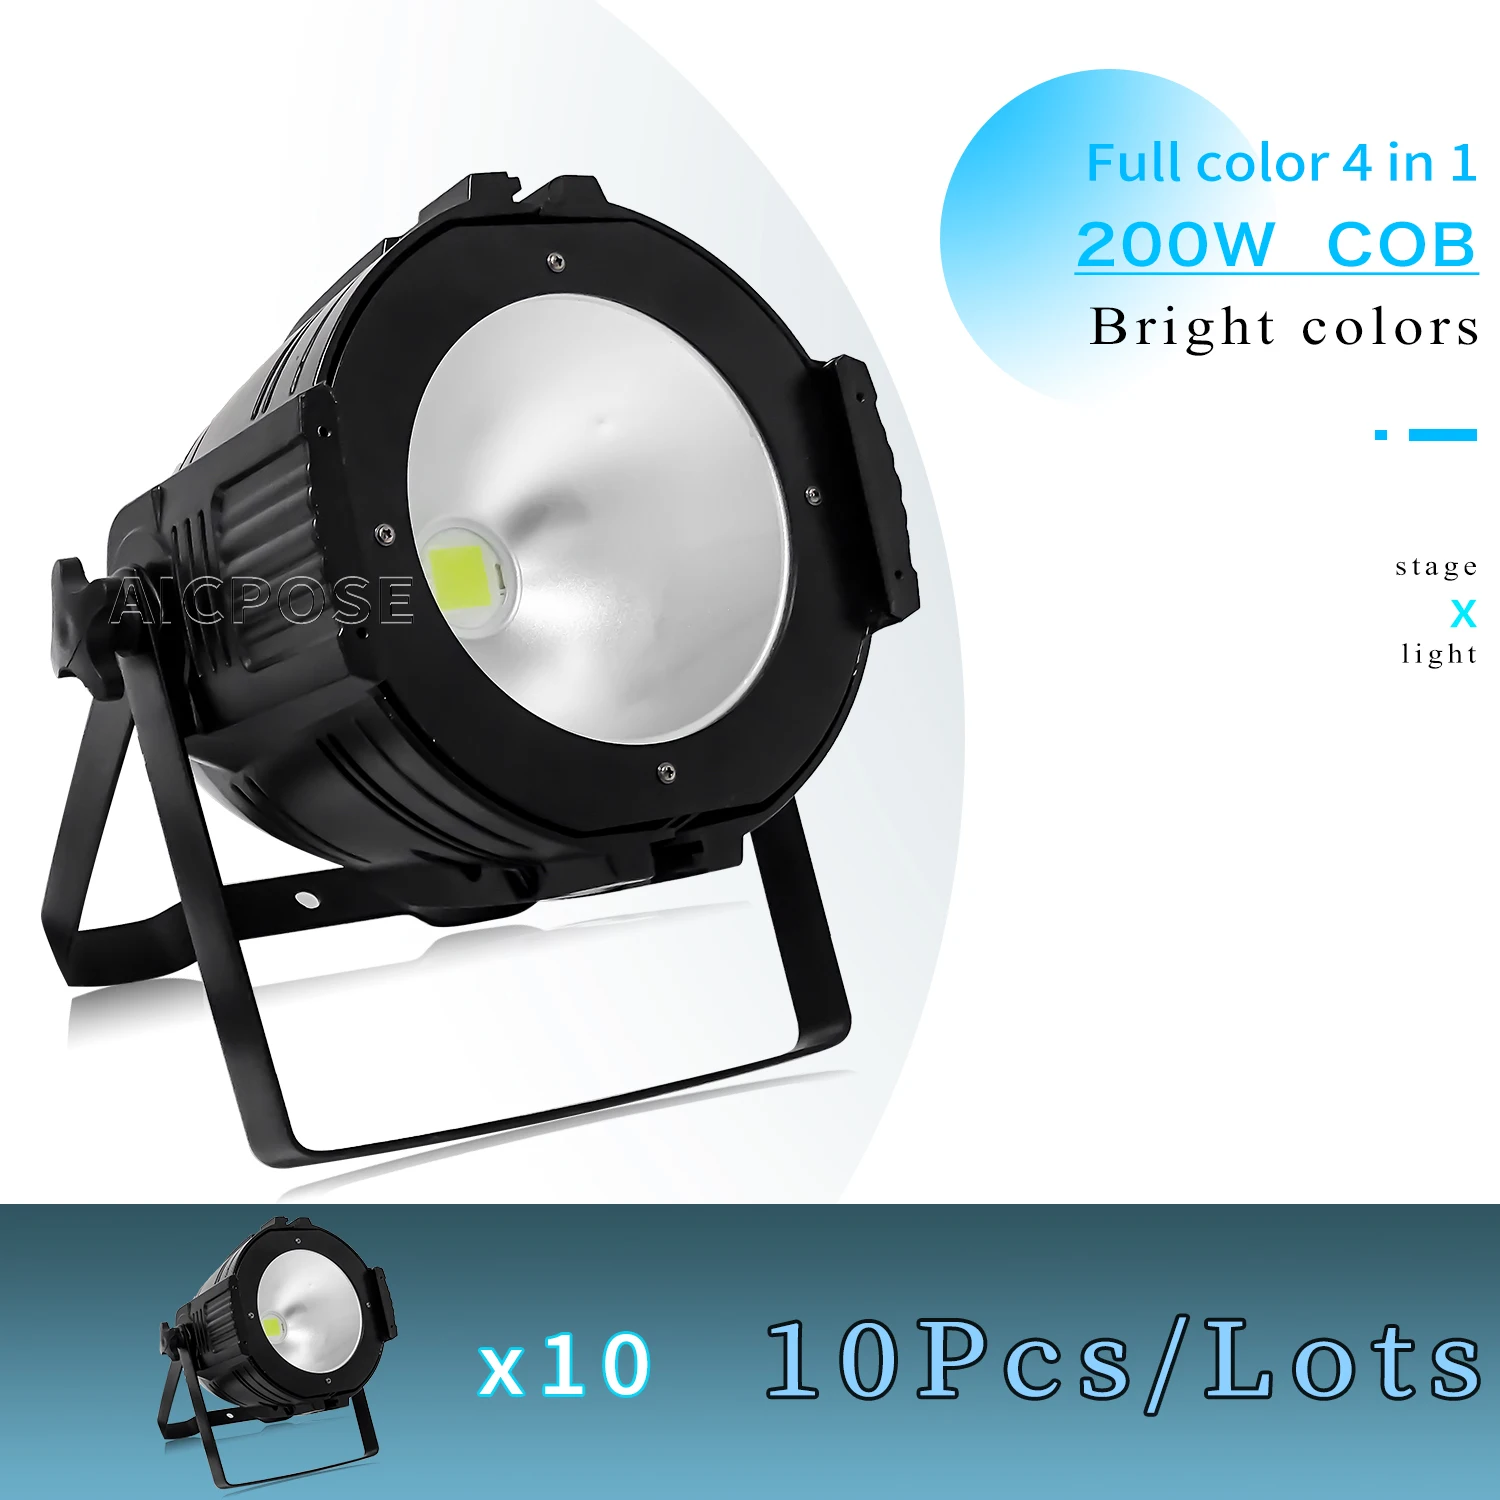 

10Pcs/Lots 200W COB Audience Light Cool White White Stage Lighting RGBW 4 in 1 Aluminum Stage Spotlight for DJ Disco Theatre